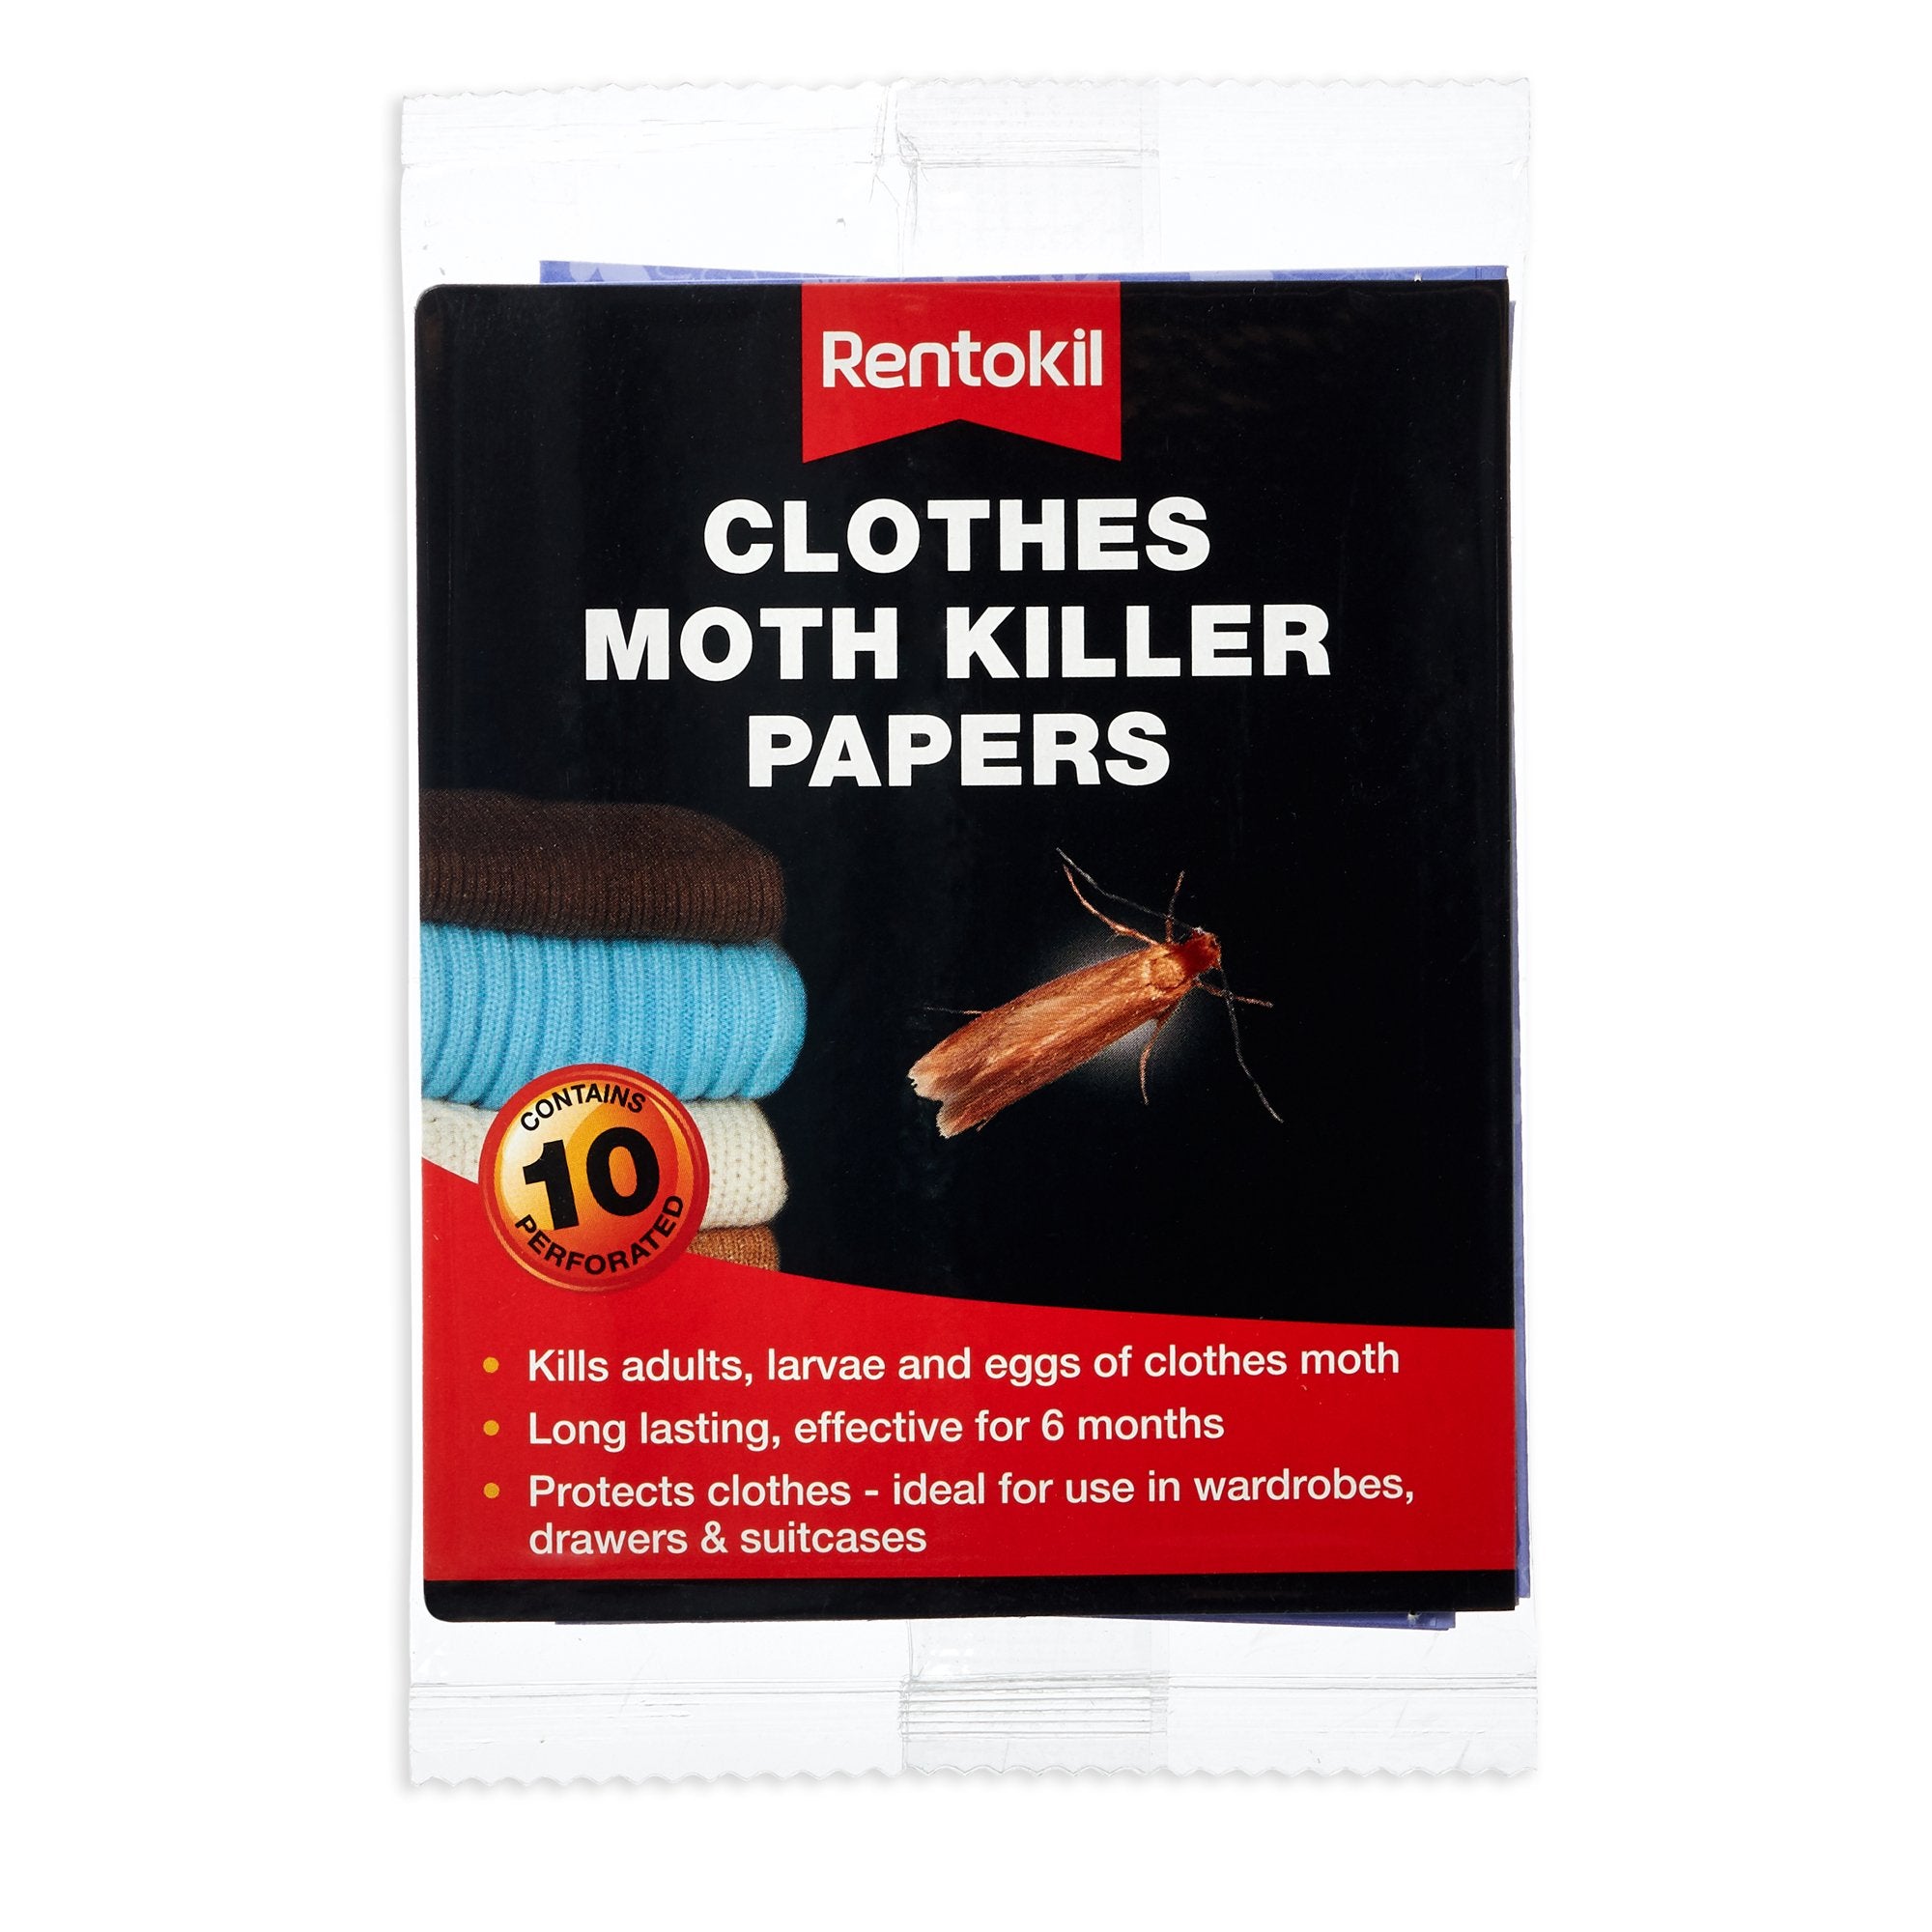 https://cdn.shopify.com/s/files/1/0199/4862/products/ARENT00201-rentokail-moth-killer-papers.jpg?v=1551195045